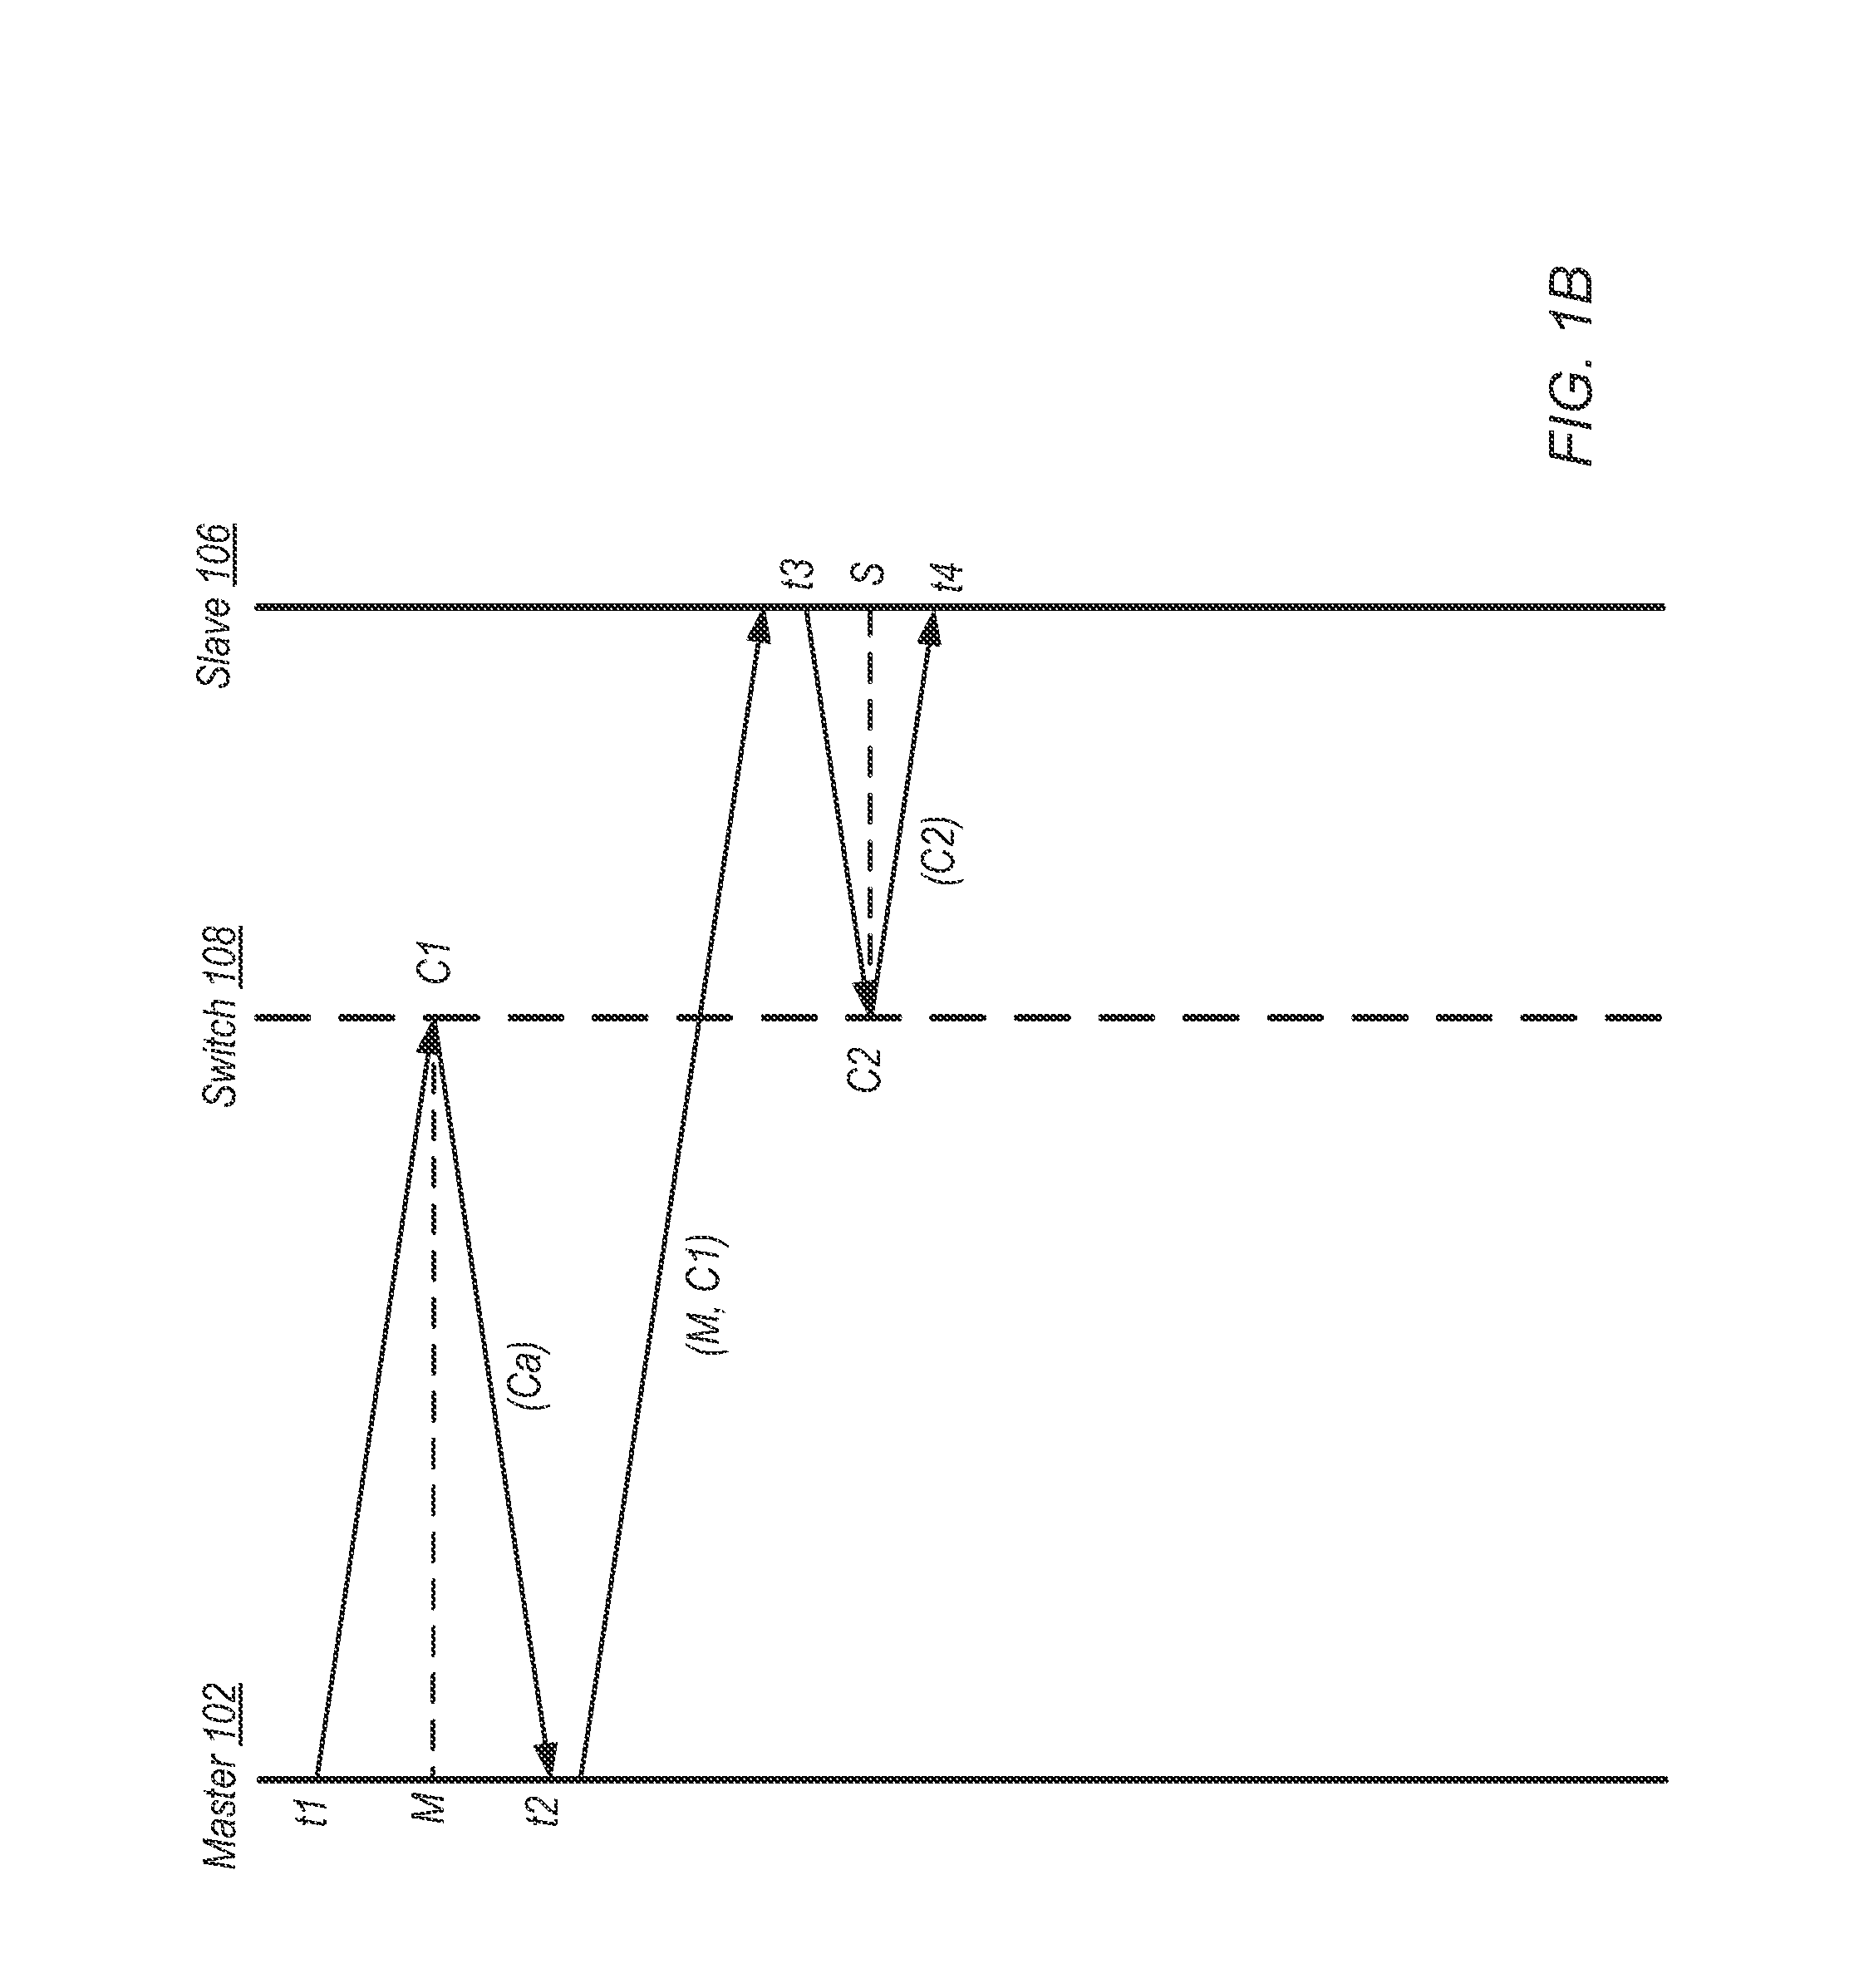 Clock Synchronization Over A Switched Fabric